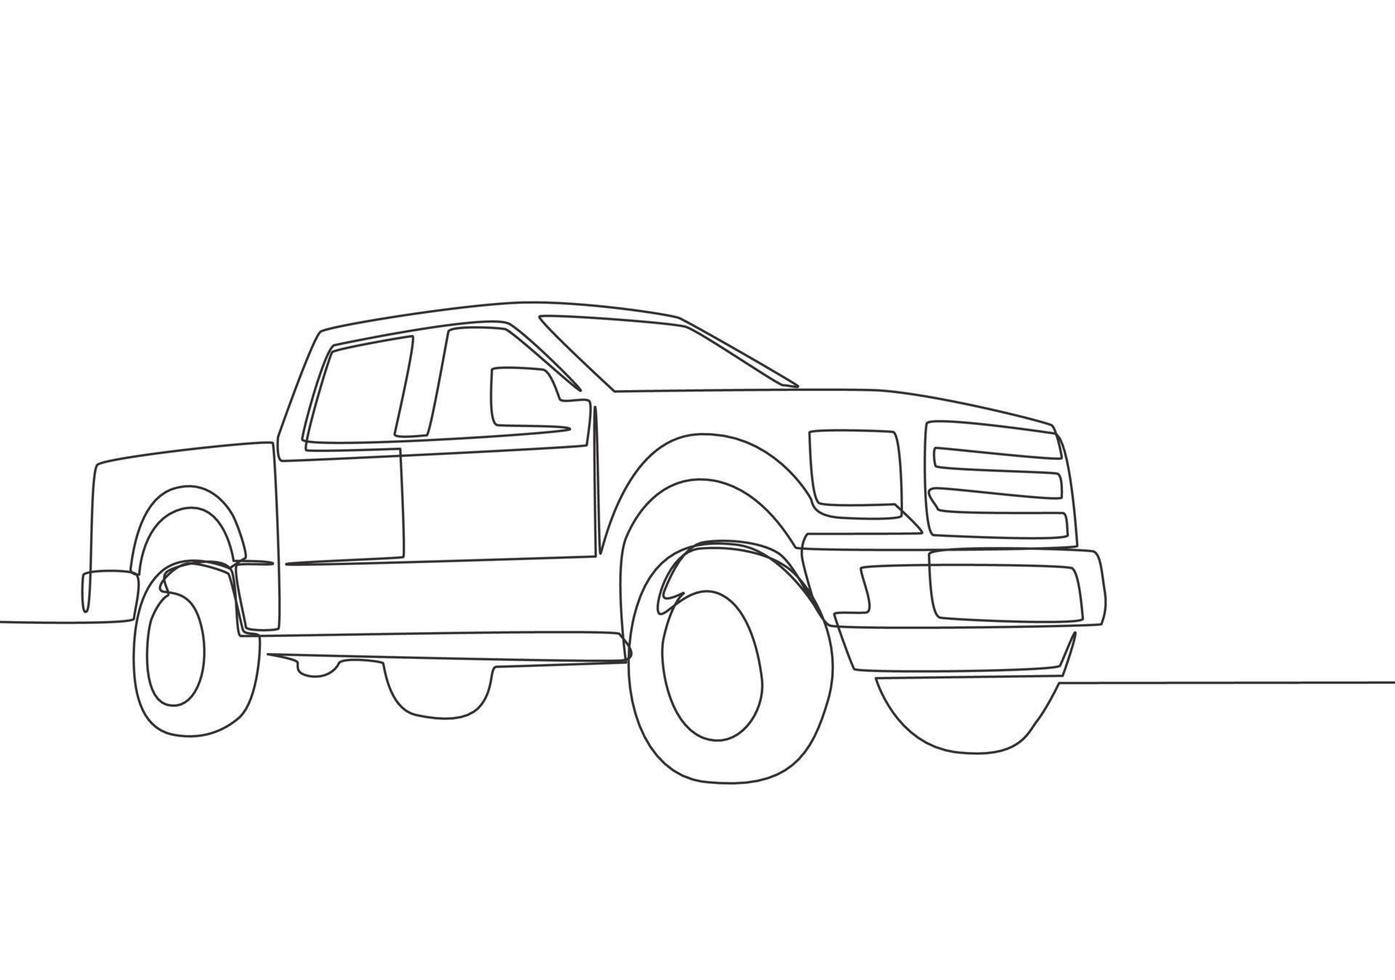 Continuous line drawing of luxury tough pickup car. Cargo carrier vehicle transportation concept. One single continuous line draw design vector